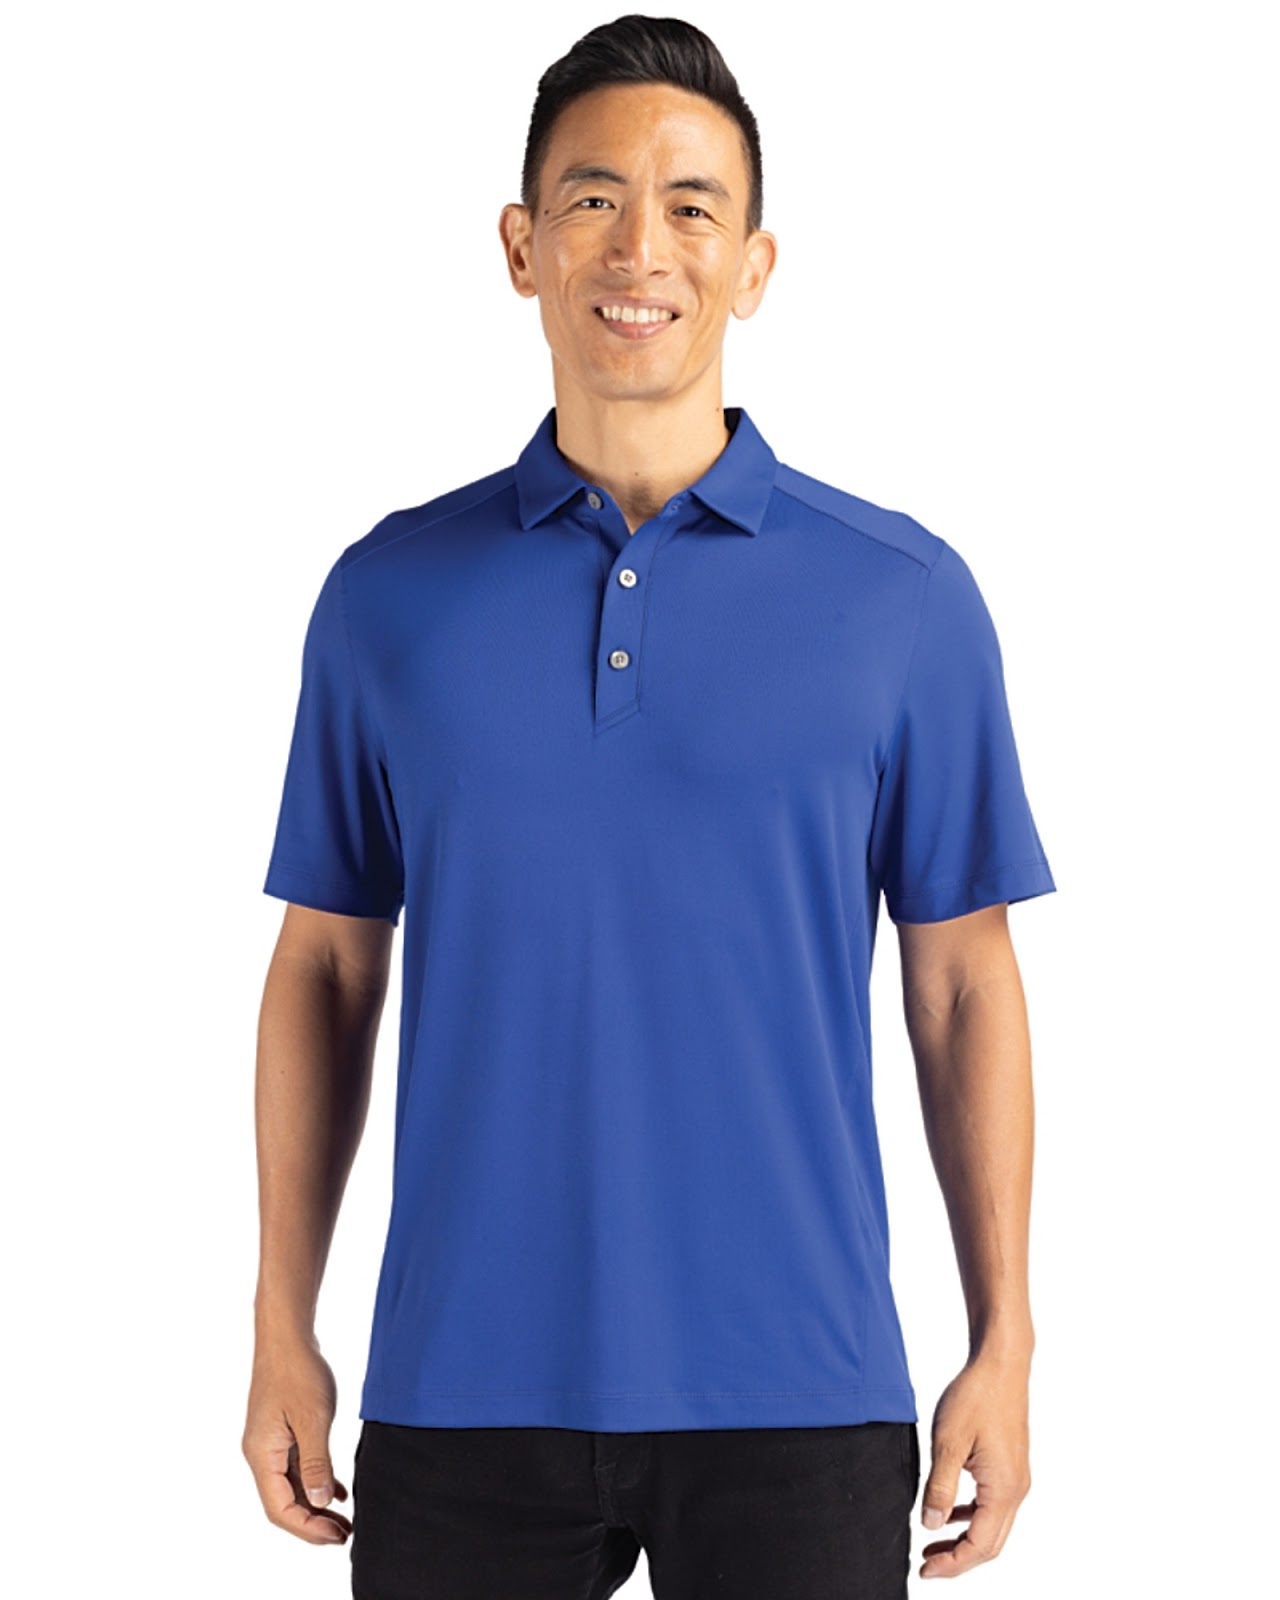 Man wearing Cutter & Buck Forge Eco Stretch Recycled Mens Big & Tall Polo in Tour Blue